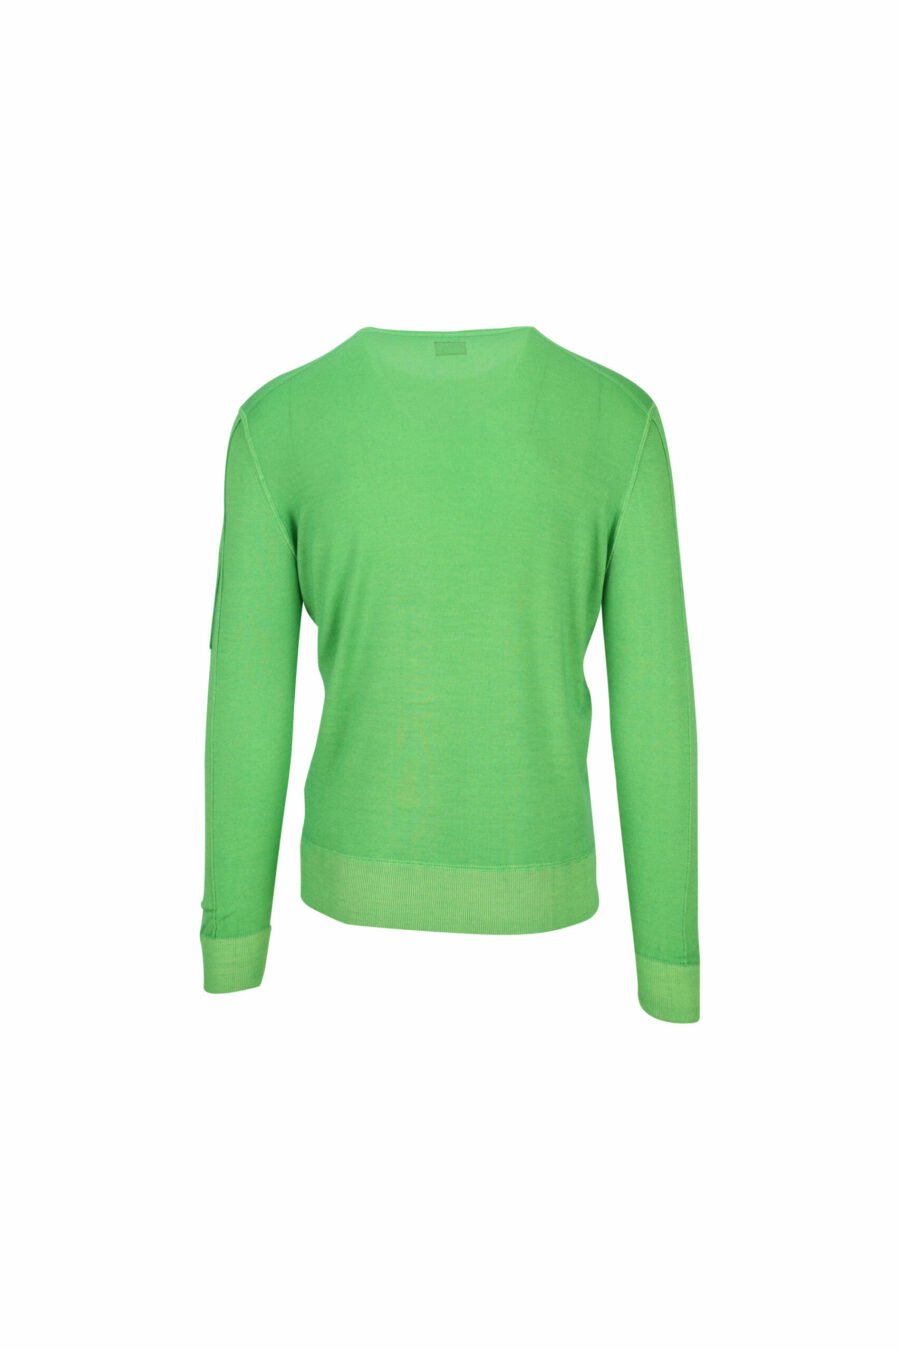 Green sweatshirt with side lens logo - 7620943580846 1 scaled